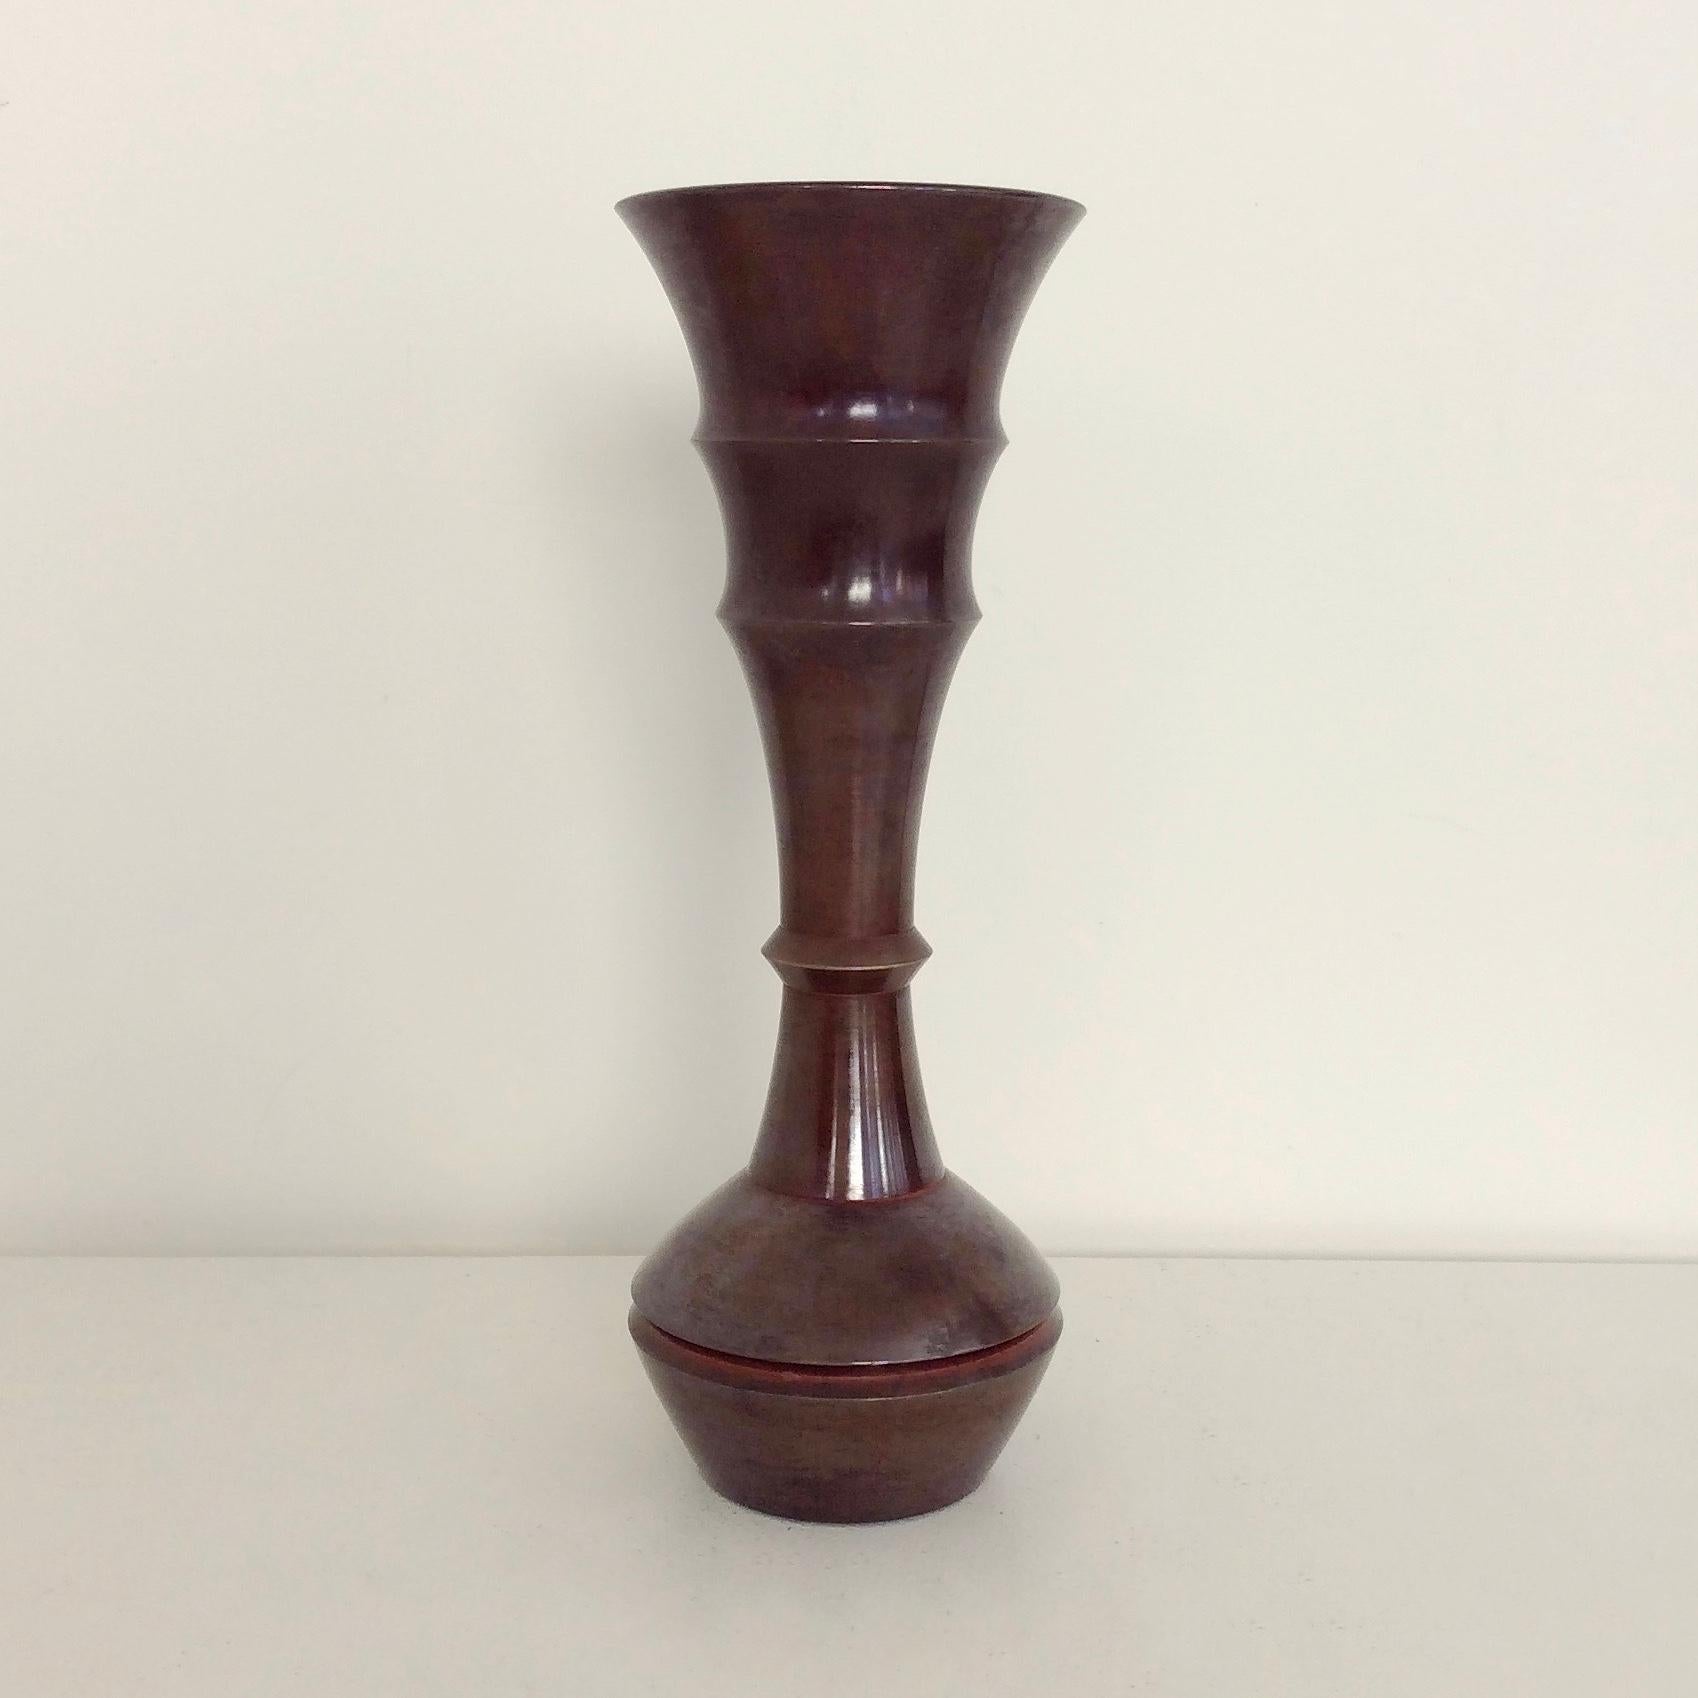 Yasumi Nakajima II (1906-1988) Ikebana vase, circa 1960, Japan.
Trumpet form, Tomoe model, with nice patinated brown-red (seido) bronze.
Signed underneath.
Dimensions: 26 cm H, 9 cm diameter.
Original good condition.
All purchases are covered